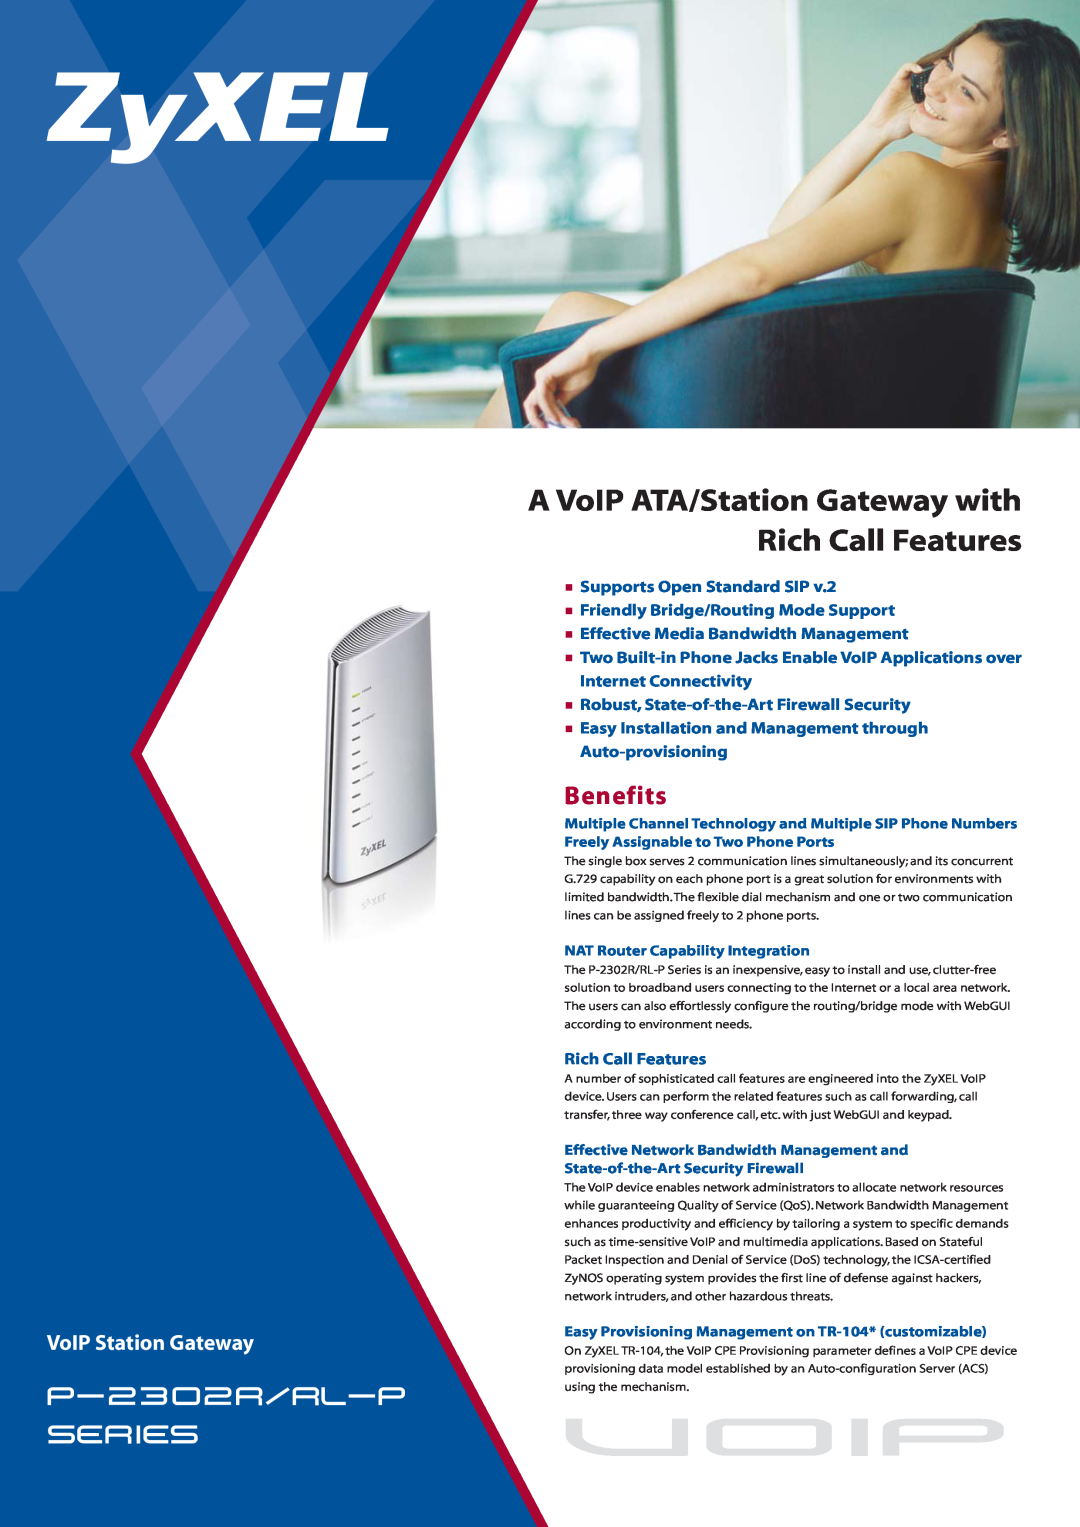 ZyXEL Communications P-2302RL-P manual Benefits, voip, A VoIP ATA/Station Gateway with Rich Call Features 